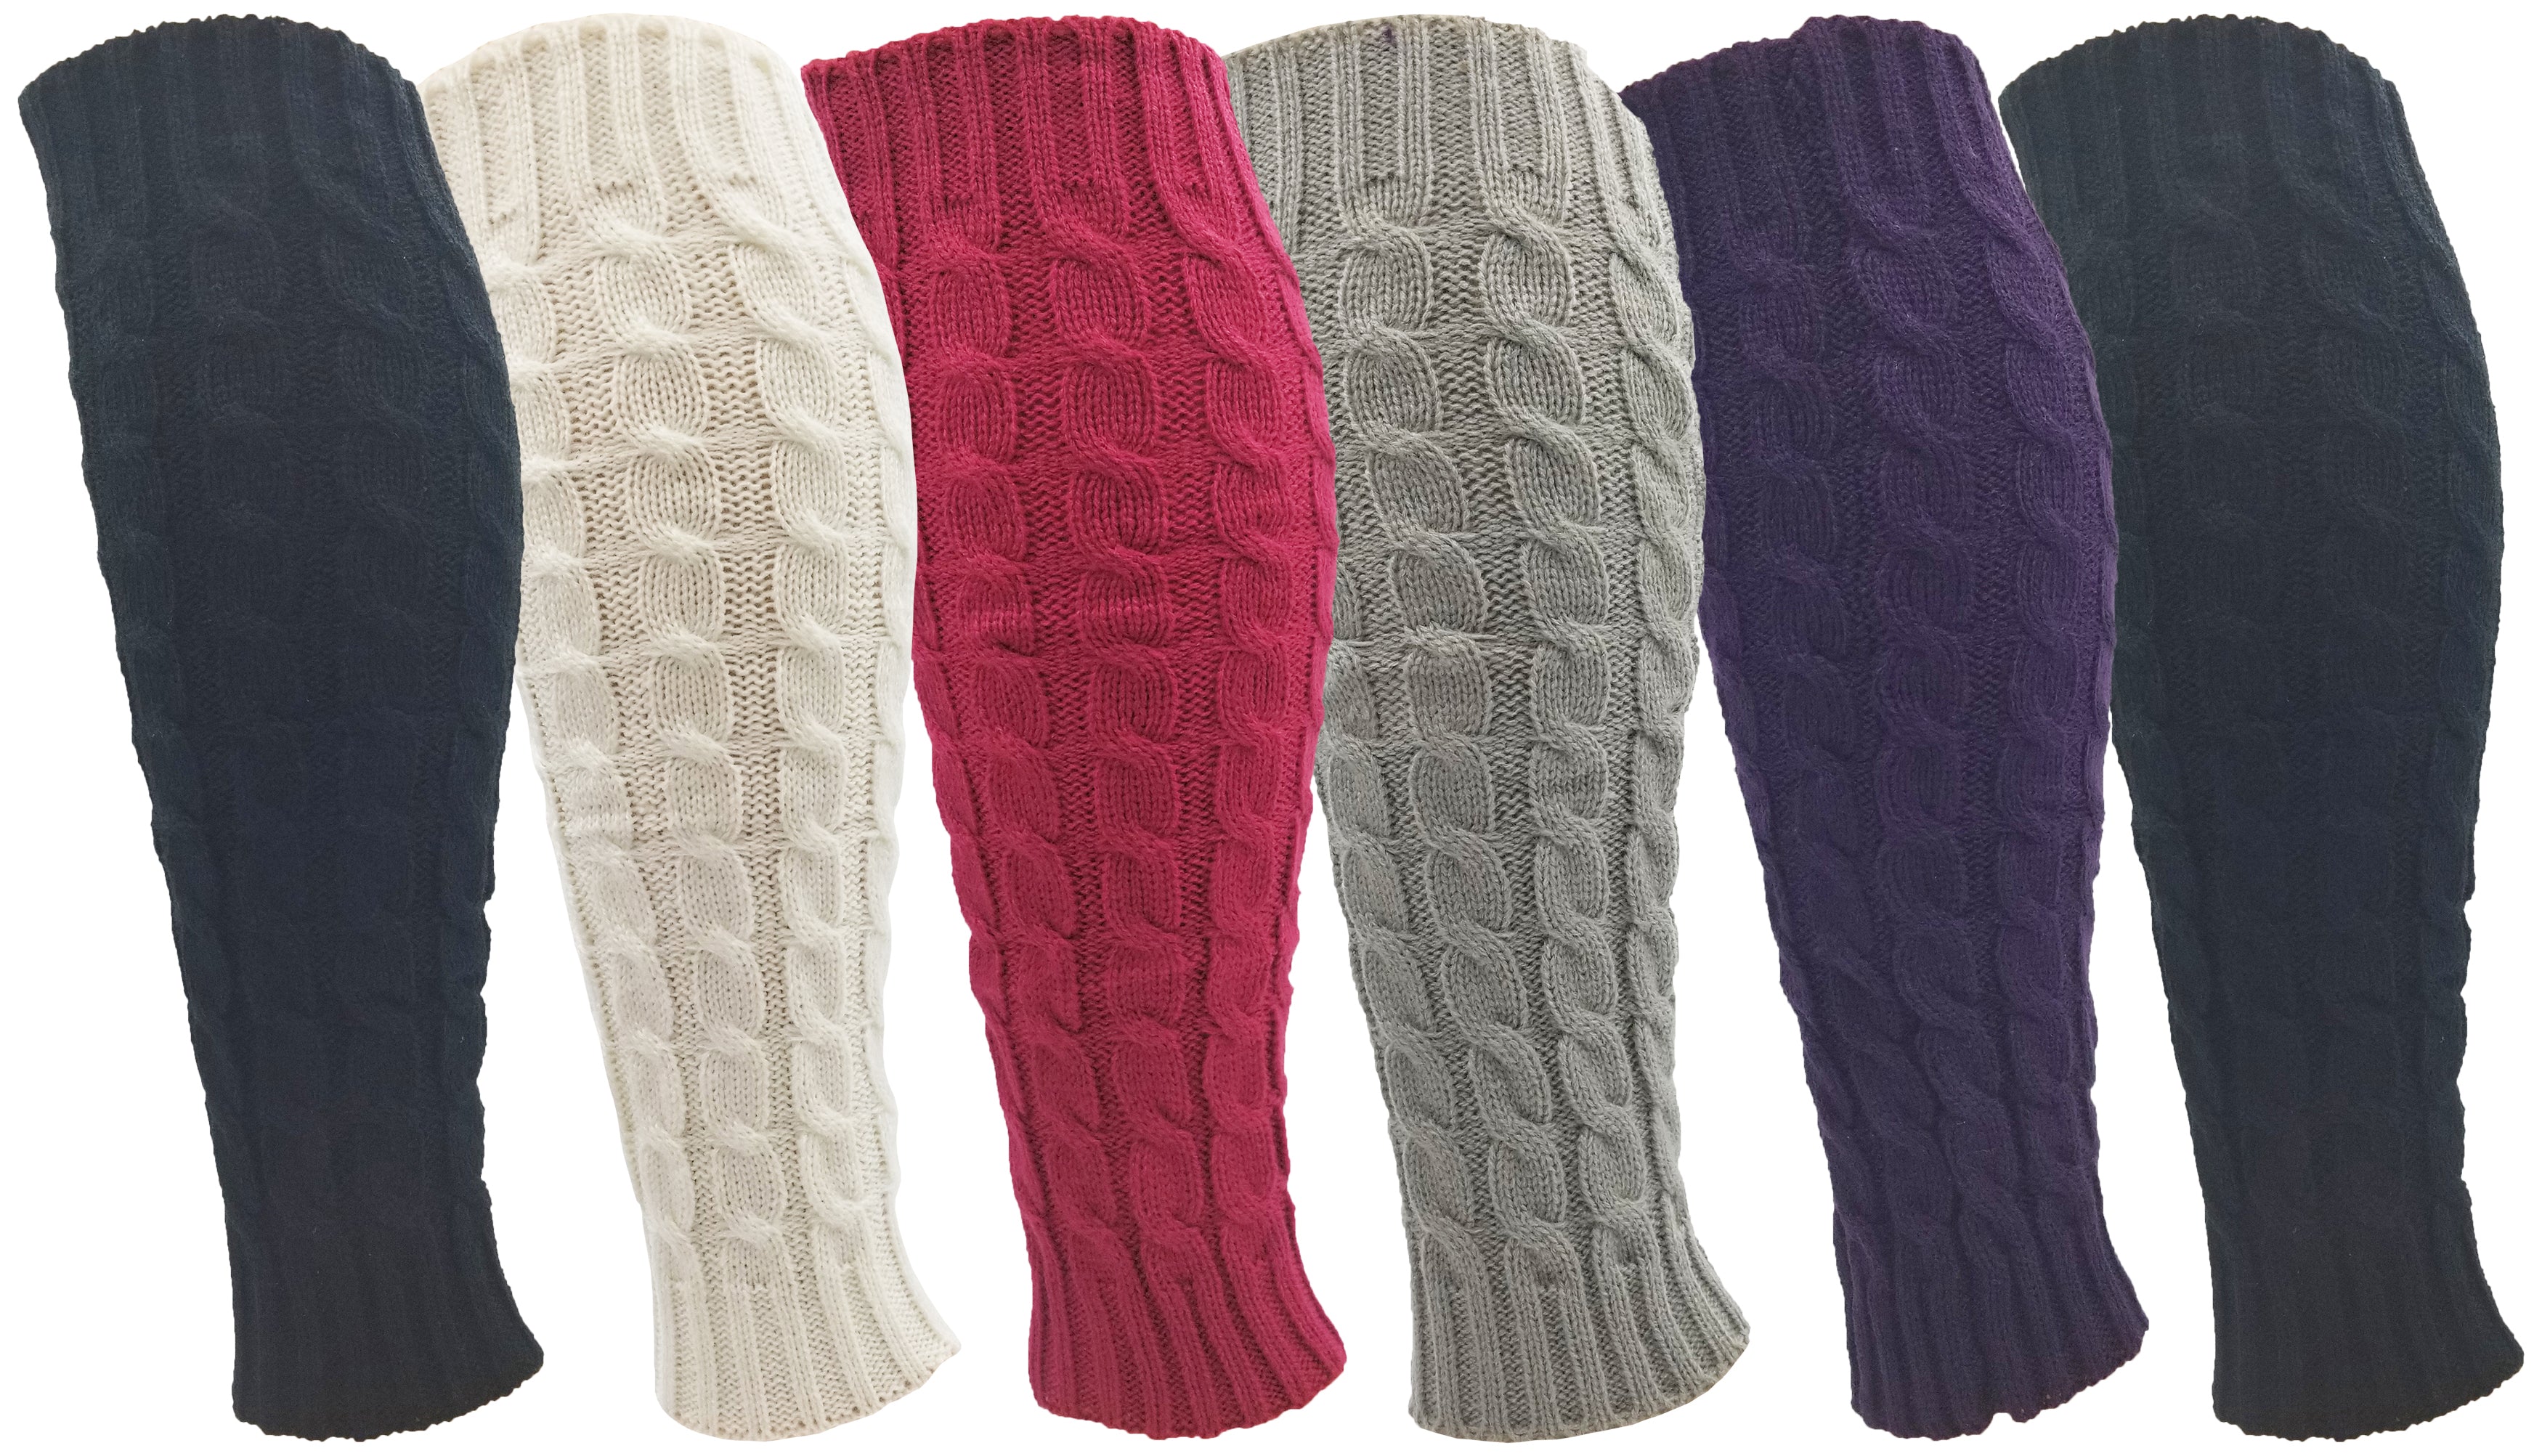 6 Pairs Womens Leg Warmers, Bulk Thermal Cable Knit Sleeve